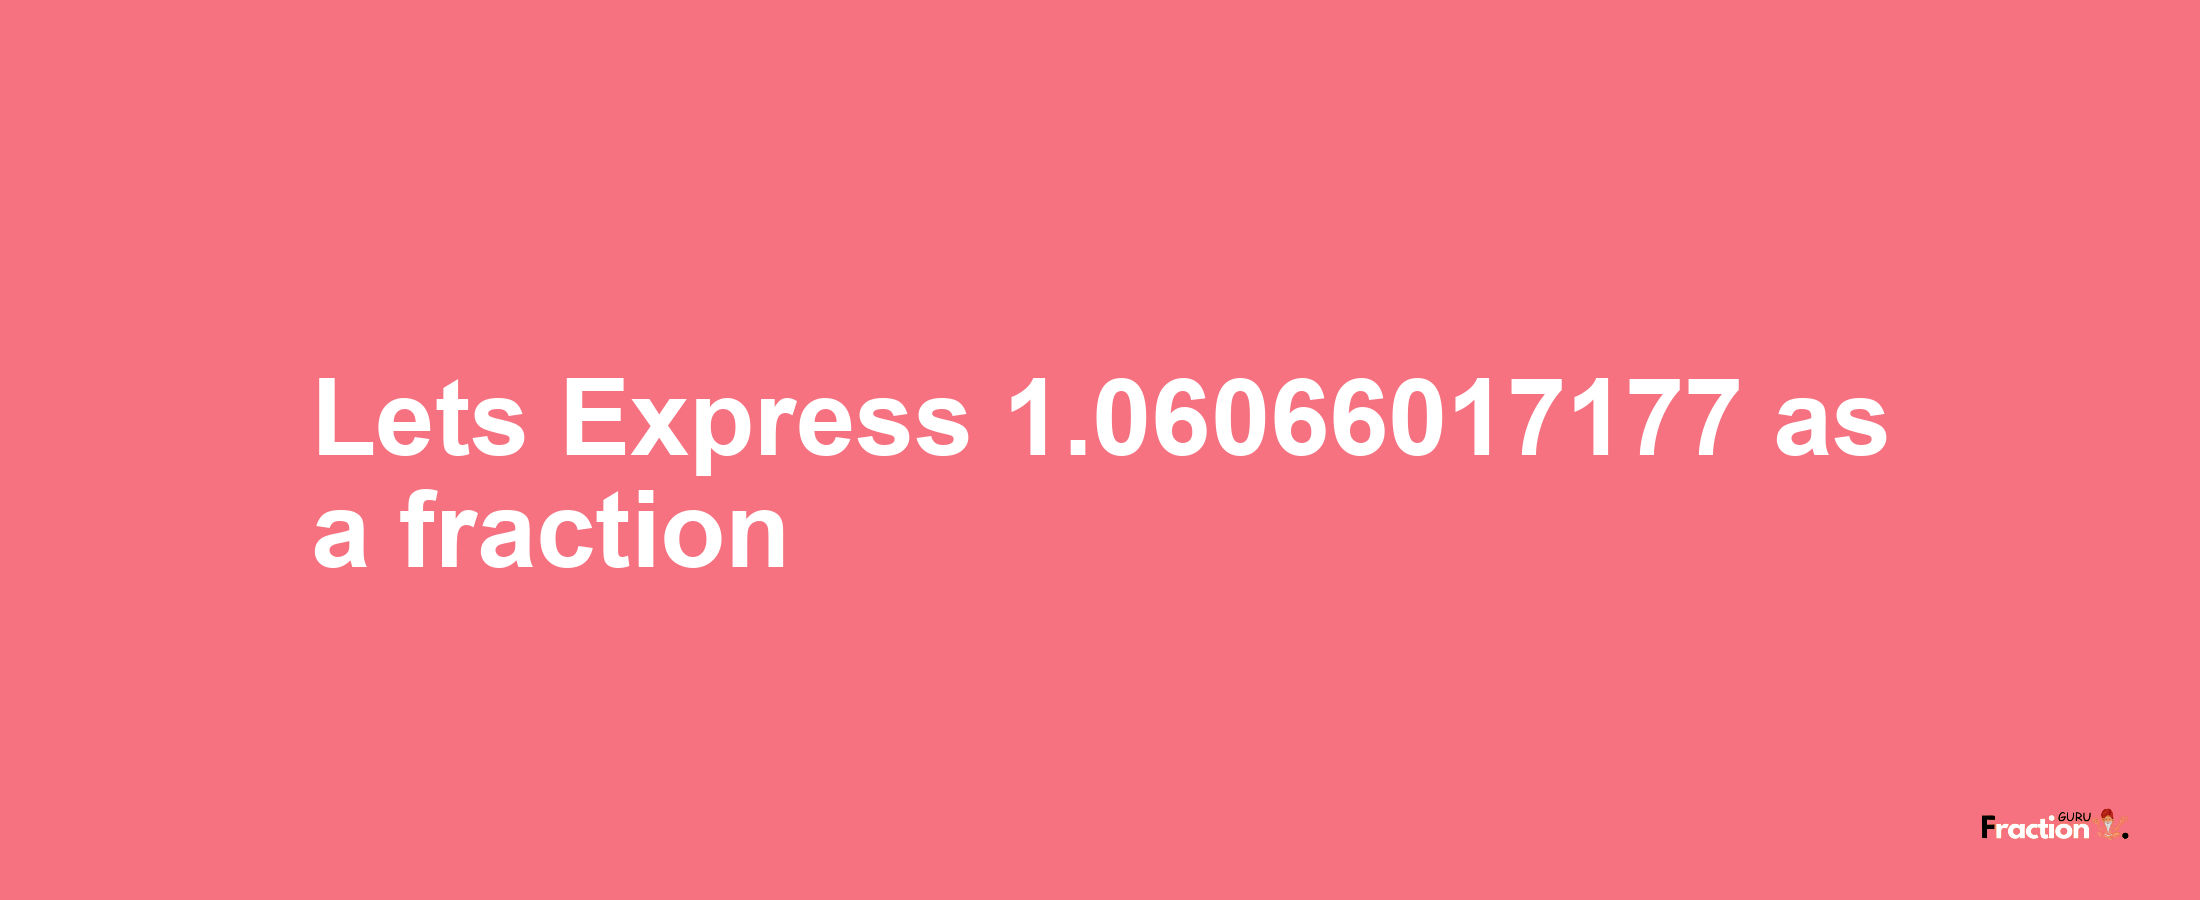 Lets Express 1.06066017177 as afraction